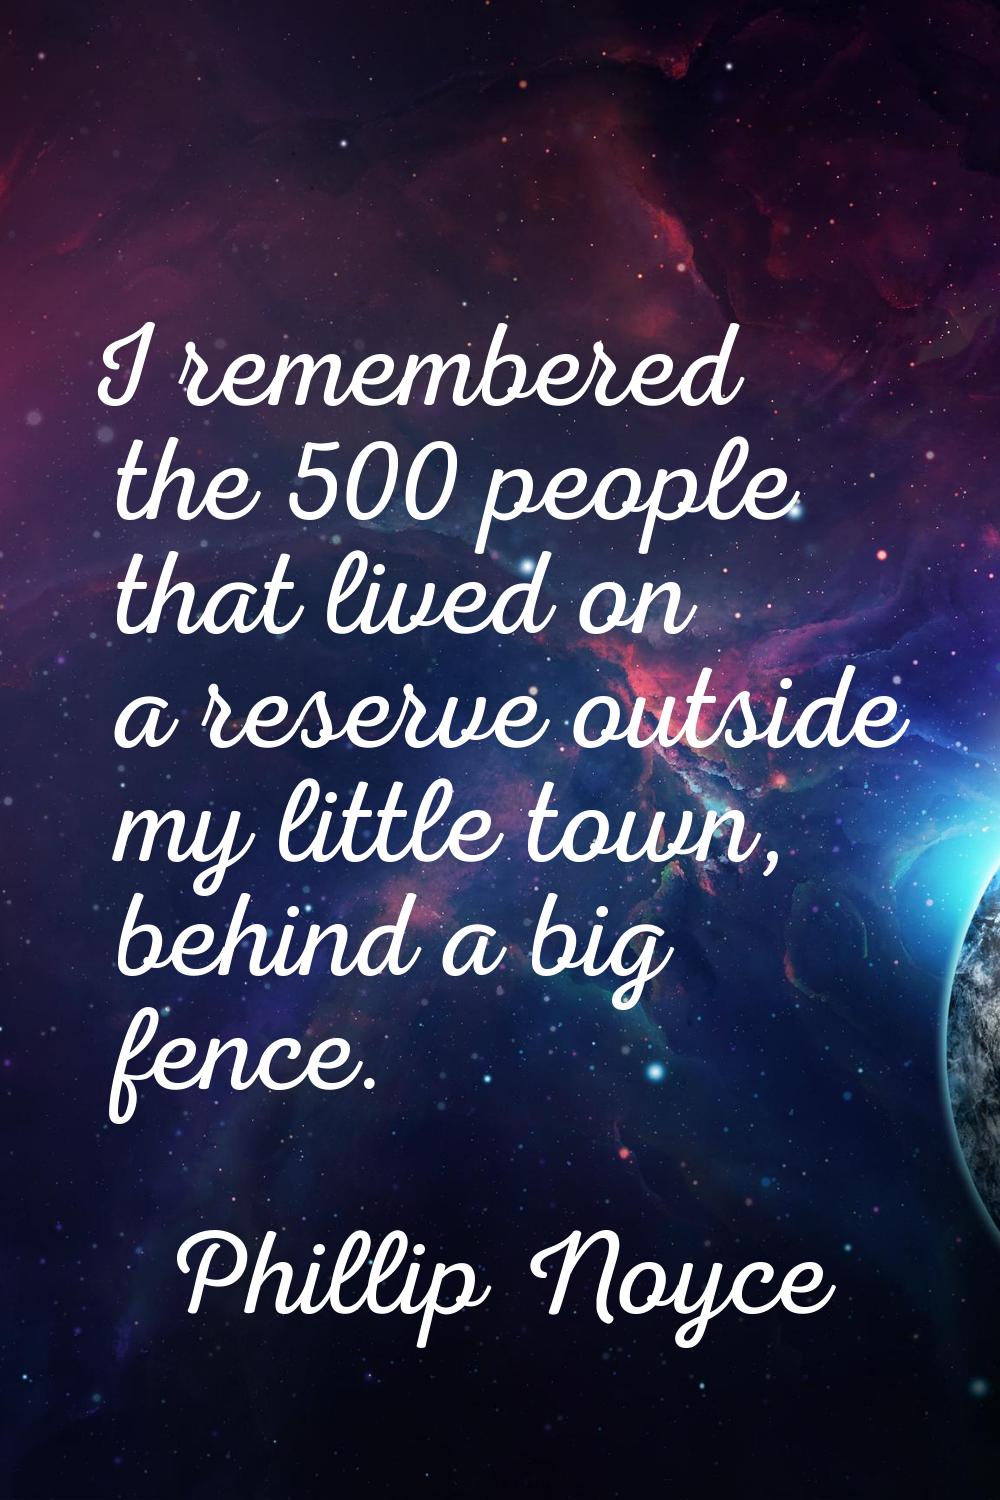 I remembered the 500 people that lived on a reserve outside my little town, behind a big fence.